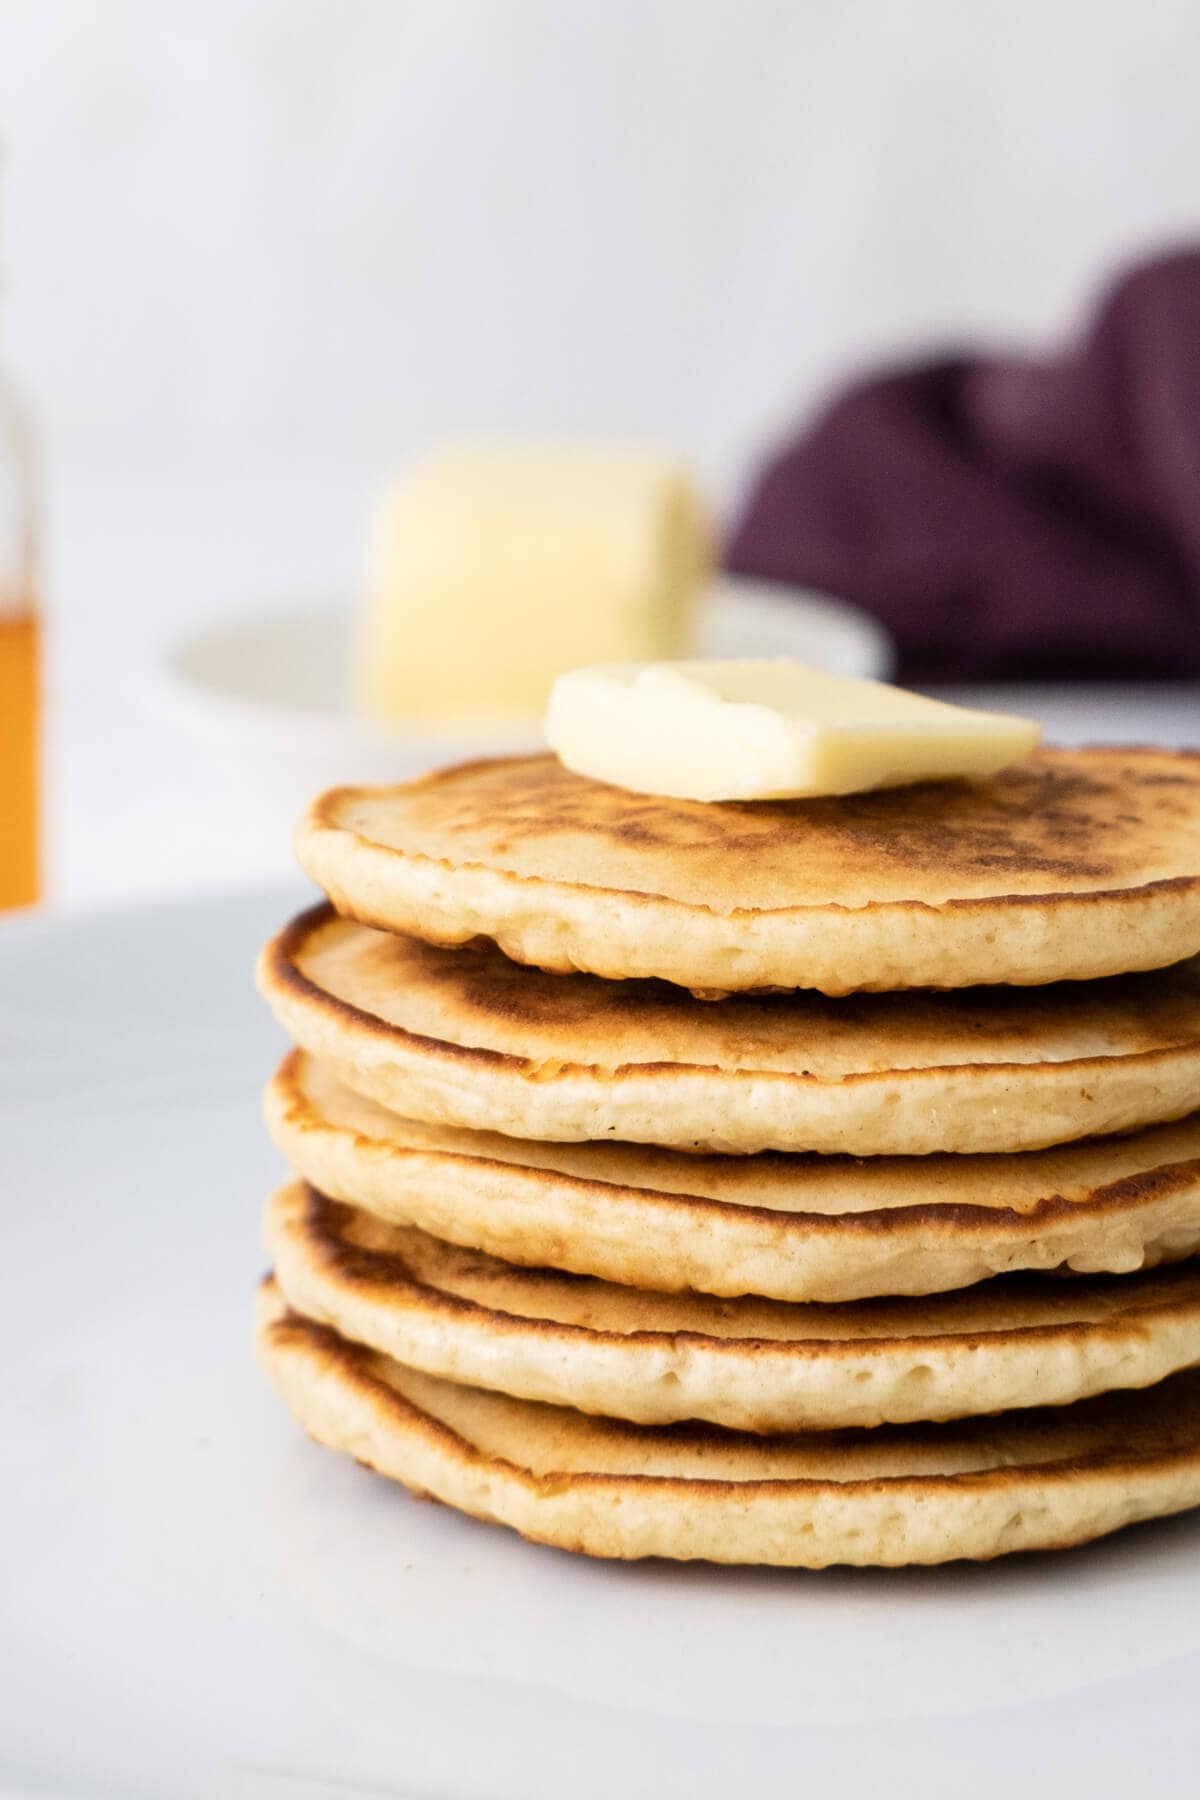 A side view of stacked scotch pancakes with a piece of butter on top.